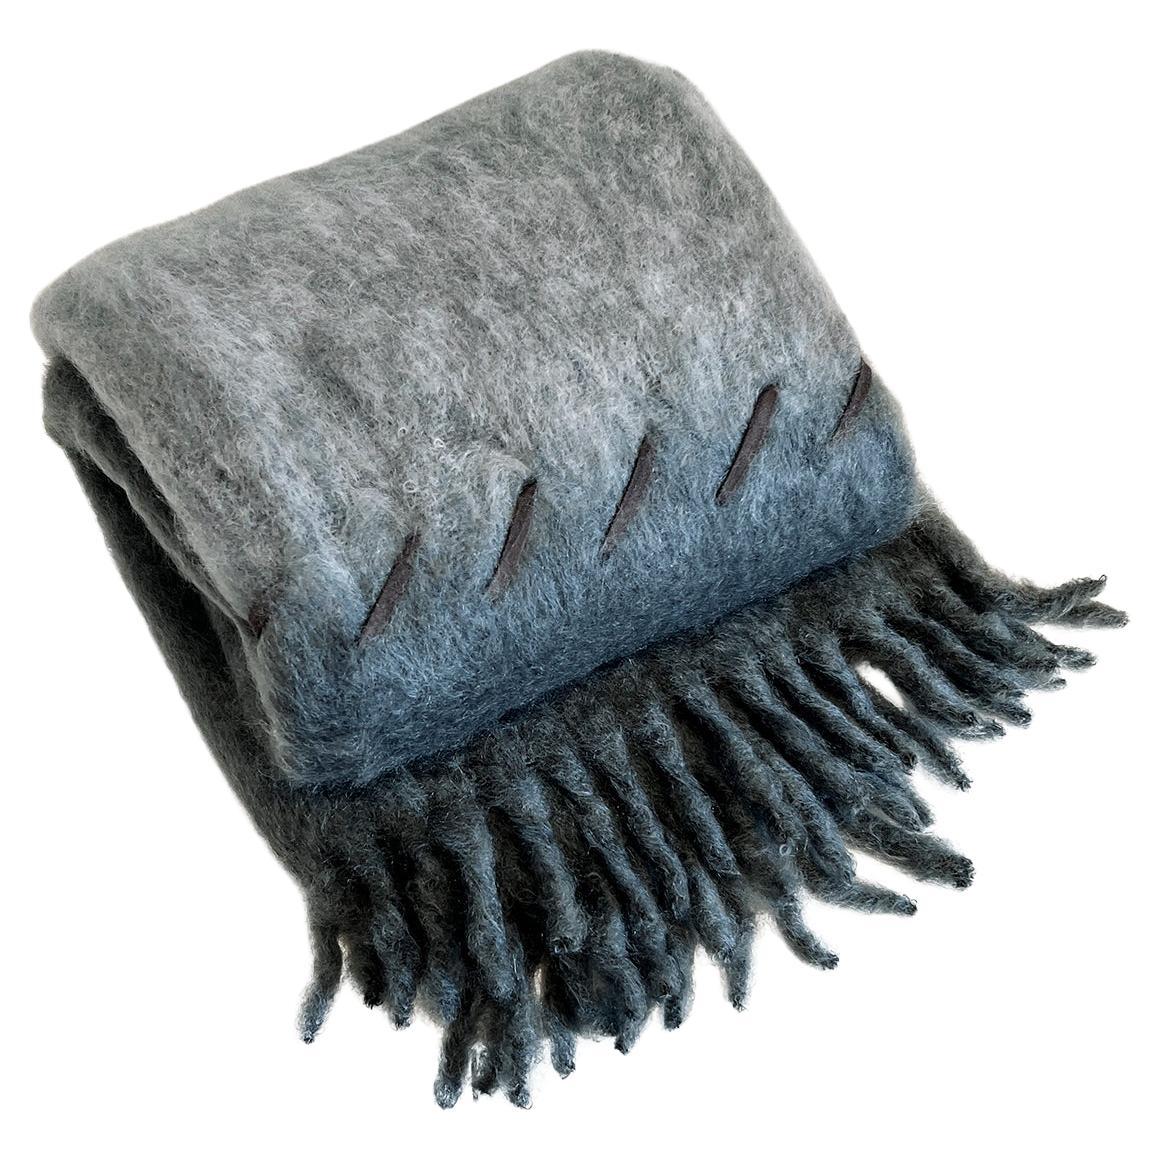 Mantas Ezcaray Steam and Smoke Blue Mohair Blanket Throw w/ Suede Whipstitch For Sale